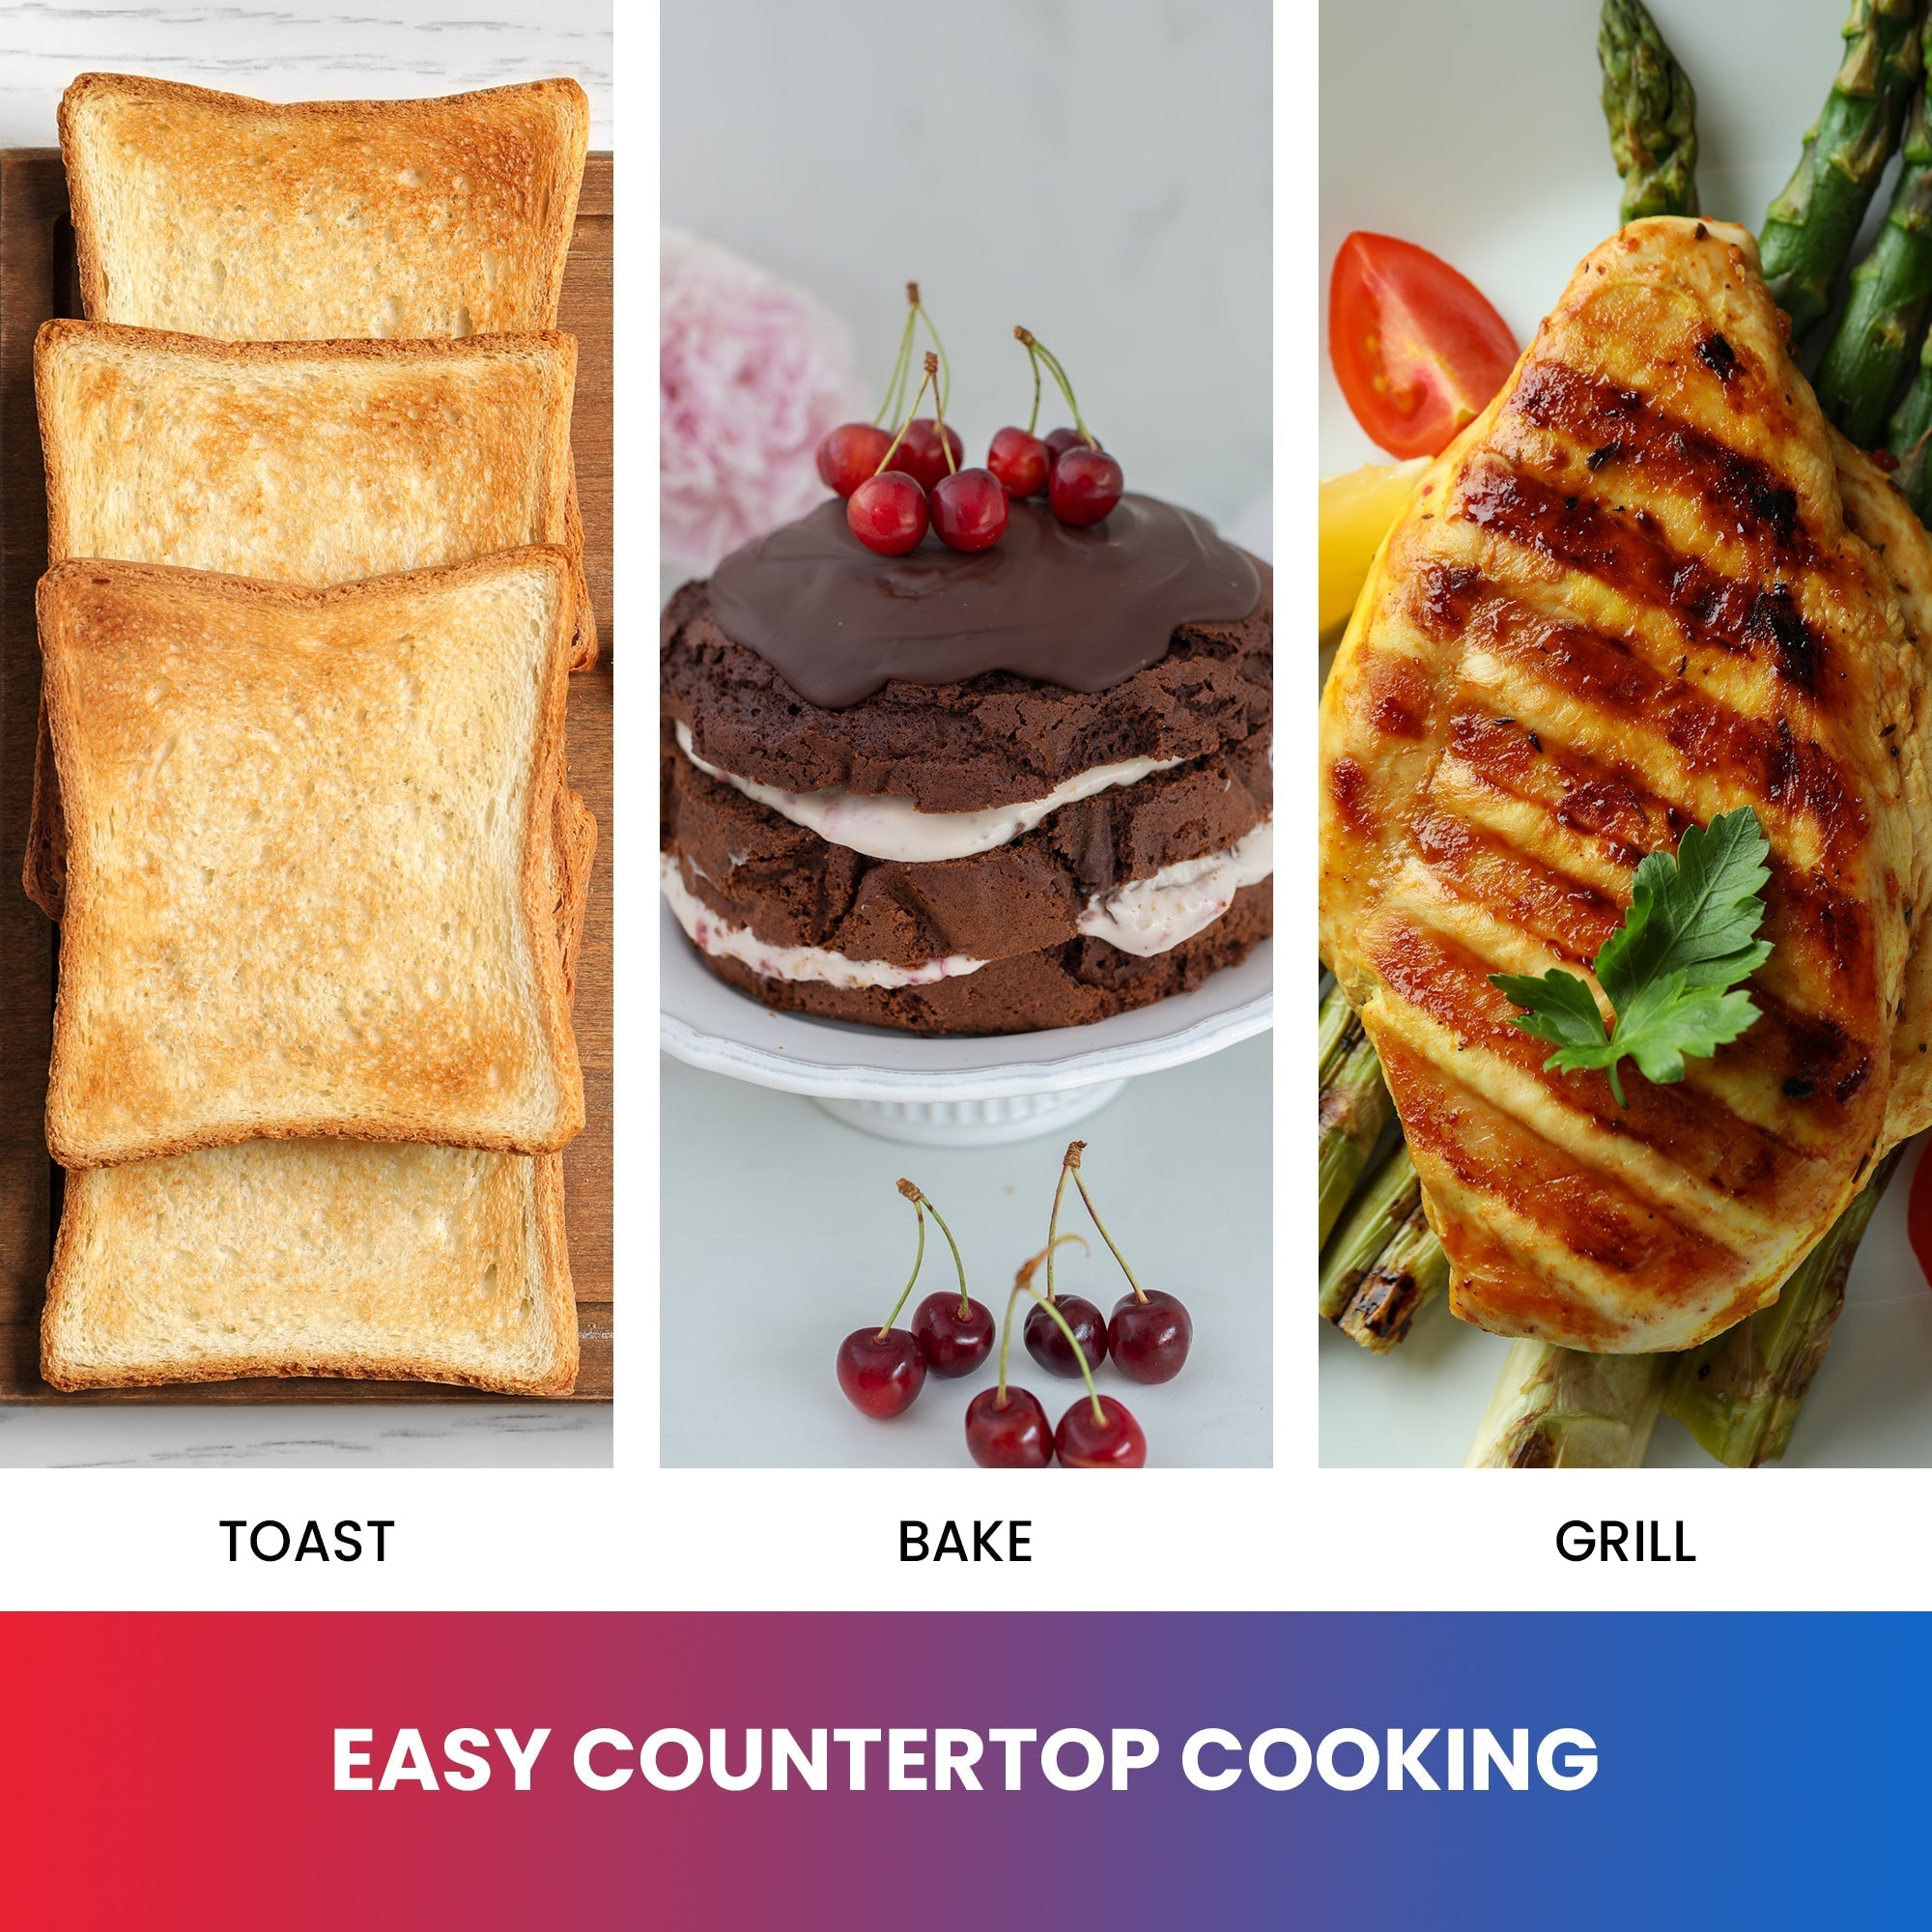 Three lifestyle images of foods that can be cooked in toaster oven: Left image, labeled "toast," shows four pieces of toast; middle, labeled "bake," shows a chocolate meringue dessert with cherries on top; right, labeled "grill," shows a grilled chicken breast and asparagus spears. Text below reads "Easy countertop cooking"